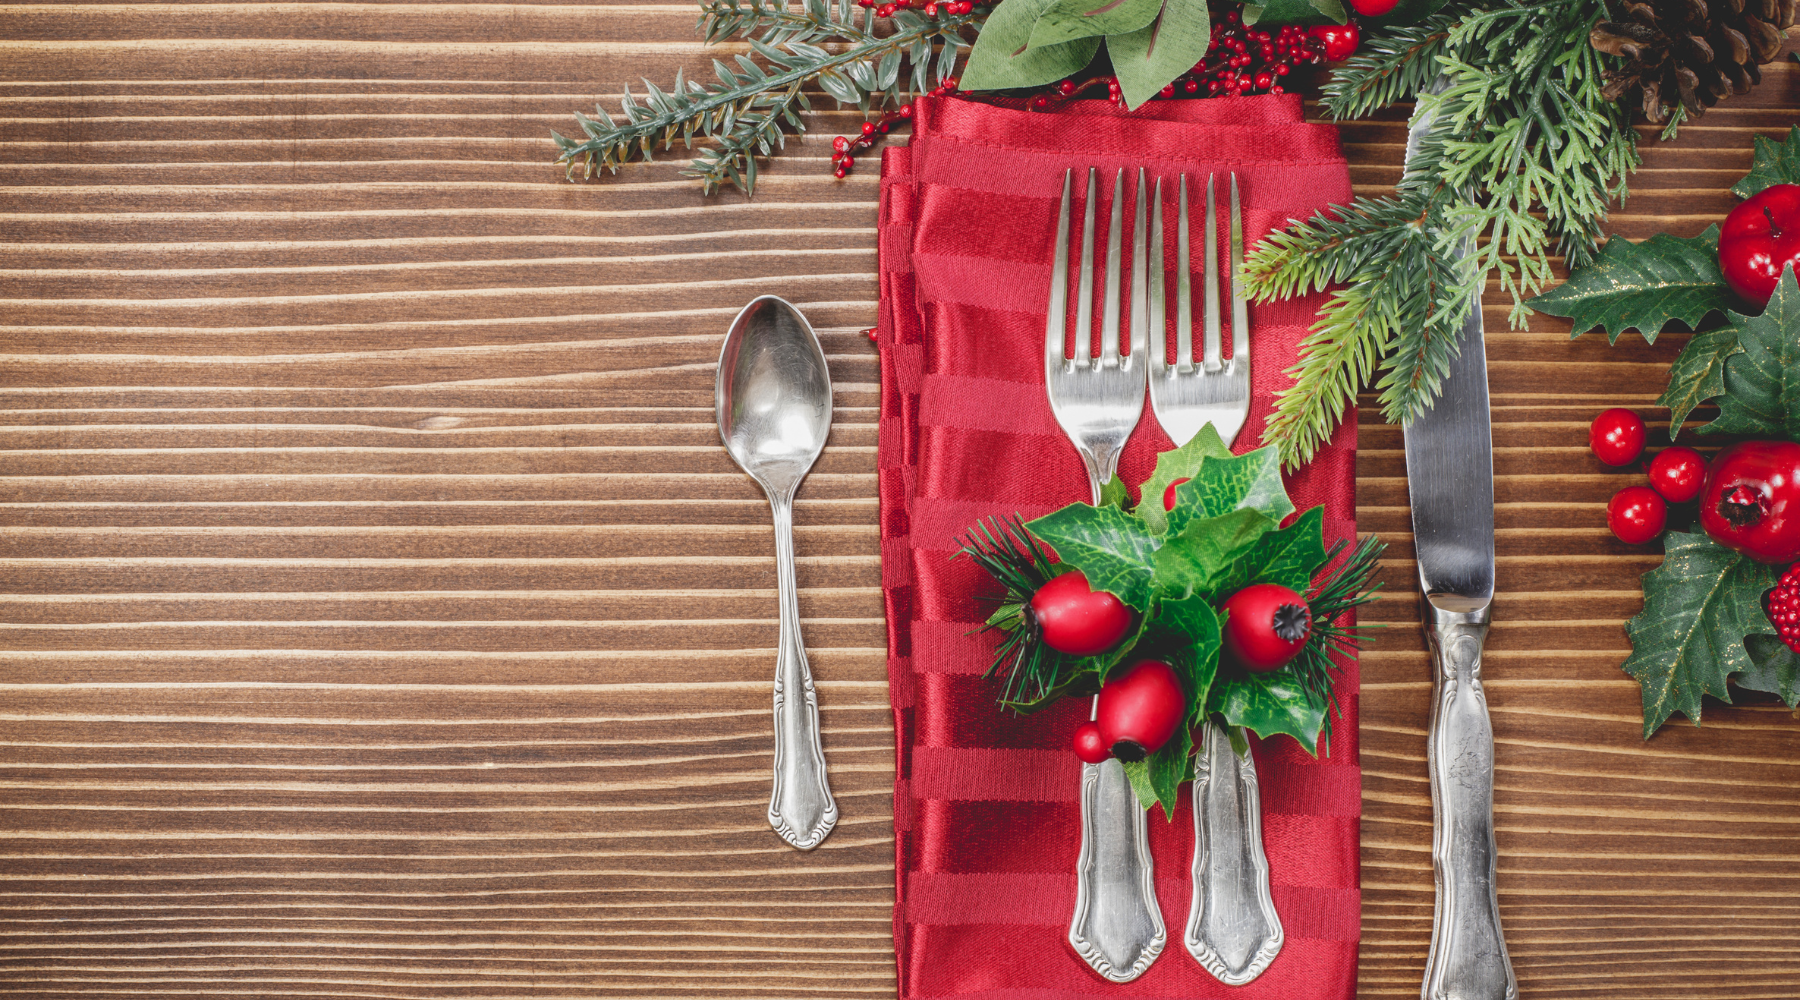 A Simple Yet Delicious Plant-Based Christmas Menu